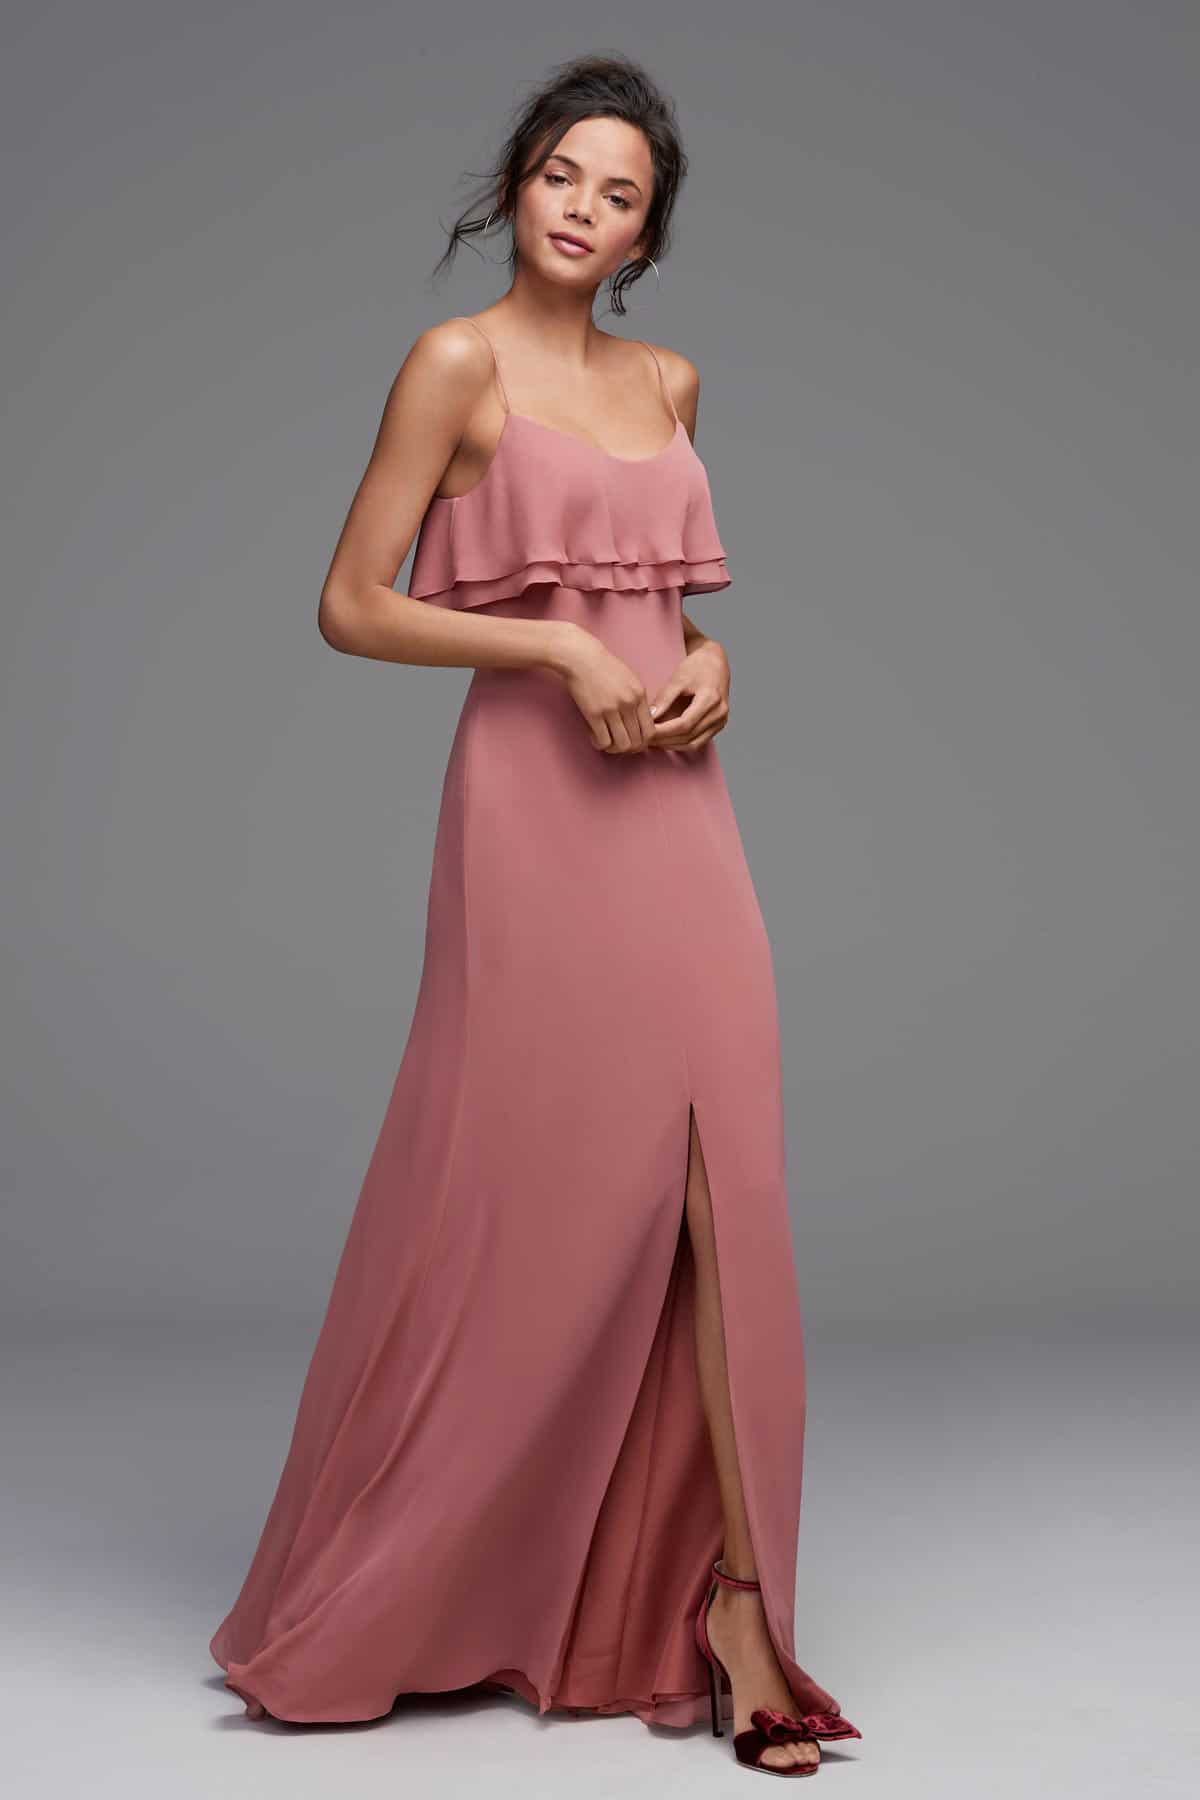 Watters Bridesmaids Collection 2018